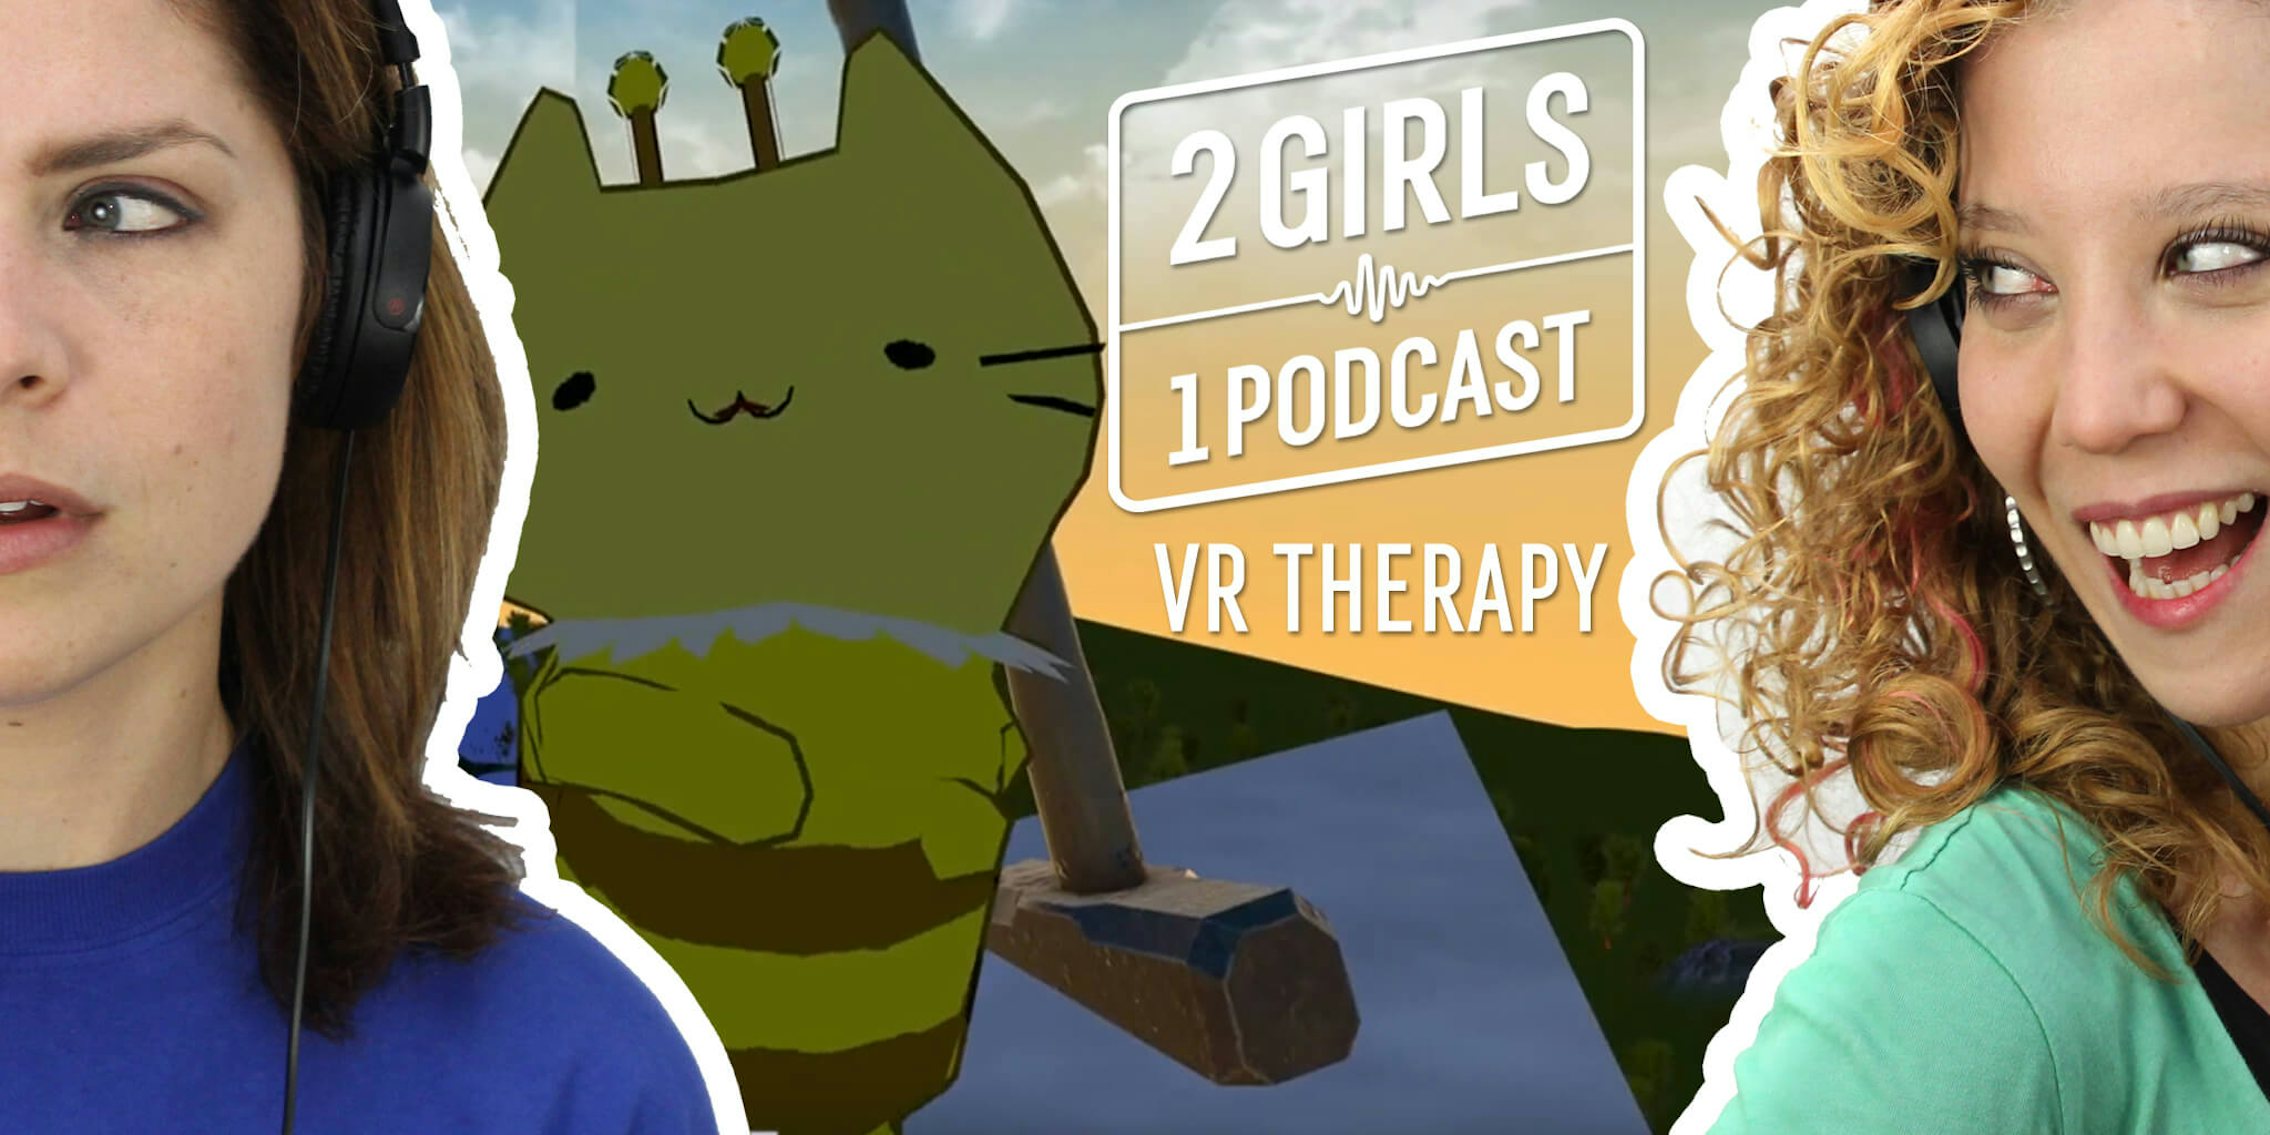 2 Girls 1 Podcast VR THERAPY